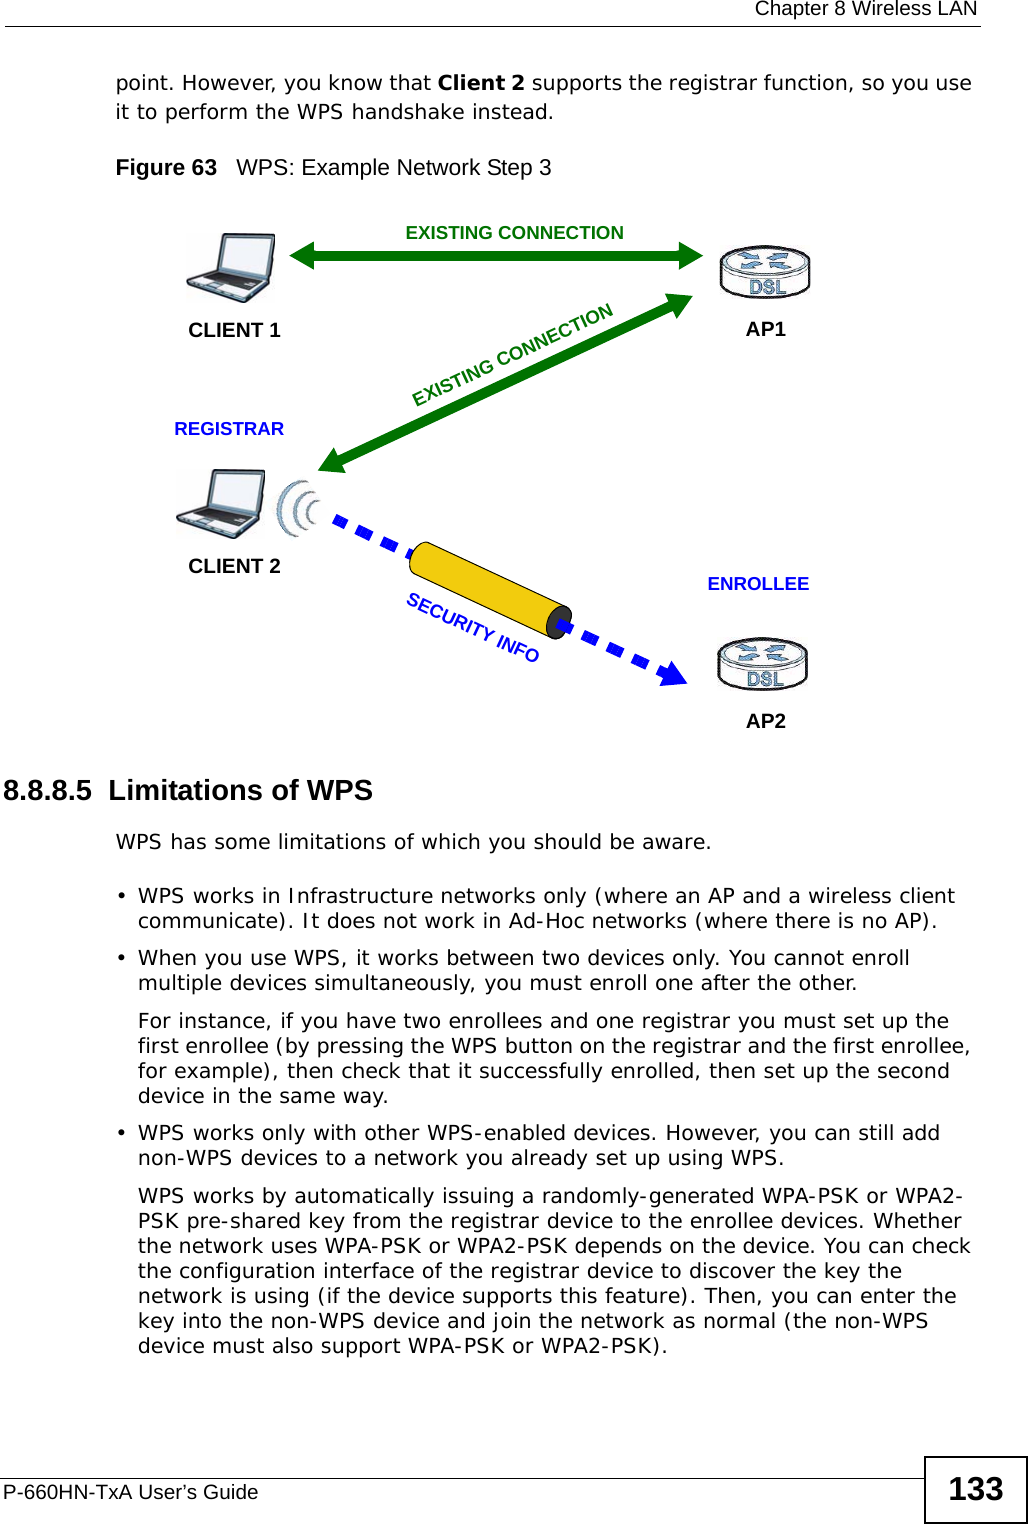  Chapter 8 Wireless LANP-660HN-TxA User’s Guide 133point. However, you know that Client 2 supports the registrar function, so you use it to perform the WPS handshake instead.Figure 63   WPS: Example Network Step 38.8.8.5  Limitations of WPSWPS has some limitations of which you should be aware. • WPS works in Infrastructure networks only (where an AP and a wireless client communicate). It does not work in Ad-Hoc networks (where there is no AP).• When you use WPS, it works between two devices only. You cannot enroll multiple devices simultaneously, you must enroll one after the other. For instance, if you have two enrollees and one registrar you must set up the first enrollee (by pressing the WPS button on the registrar and the first enrollee, for example), then check that it successfully enrolled, then set up the second device in the same way.• WPS works only with other WPS-enabled devices. However, you can still add non-WPS devices to a network you already set up using WPS. WPS works by automatically issuing a randomly-generated WPA-PSK or WPA2-PSK pre-shared key from the registrar device to the enrollee devices. Whether the network uses WPA-PSK or WPA2-PSK depends on the device. You can check the configuration interface of the registrar device to discover the key the network is using (if the device supports this feature). Then, you can enter the key into the non-WPS device and join the network as normal (the non-WPS device must also support WPA-PSK or WPA2-PSK).CLIENT 1 AP1REGISTRARCLIENT 2EXISTING CONNECTIONSECURITY INFOENROLLEEAP2EXISTING CONNECTION